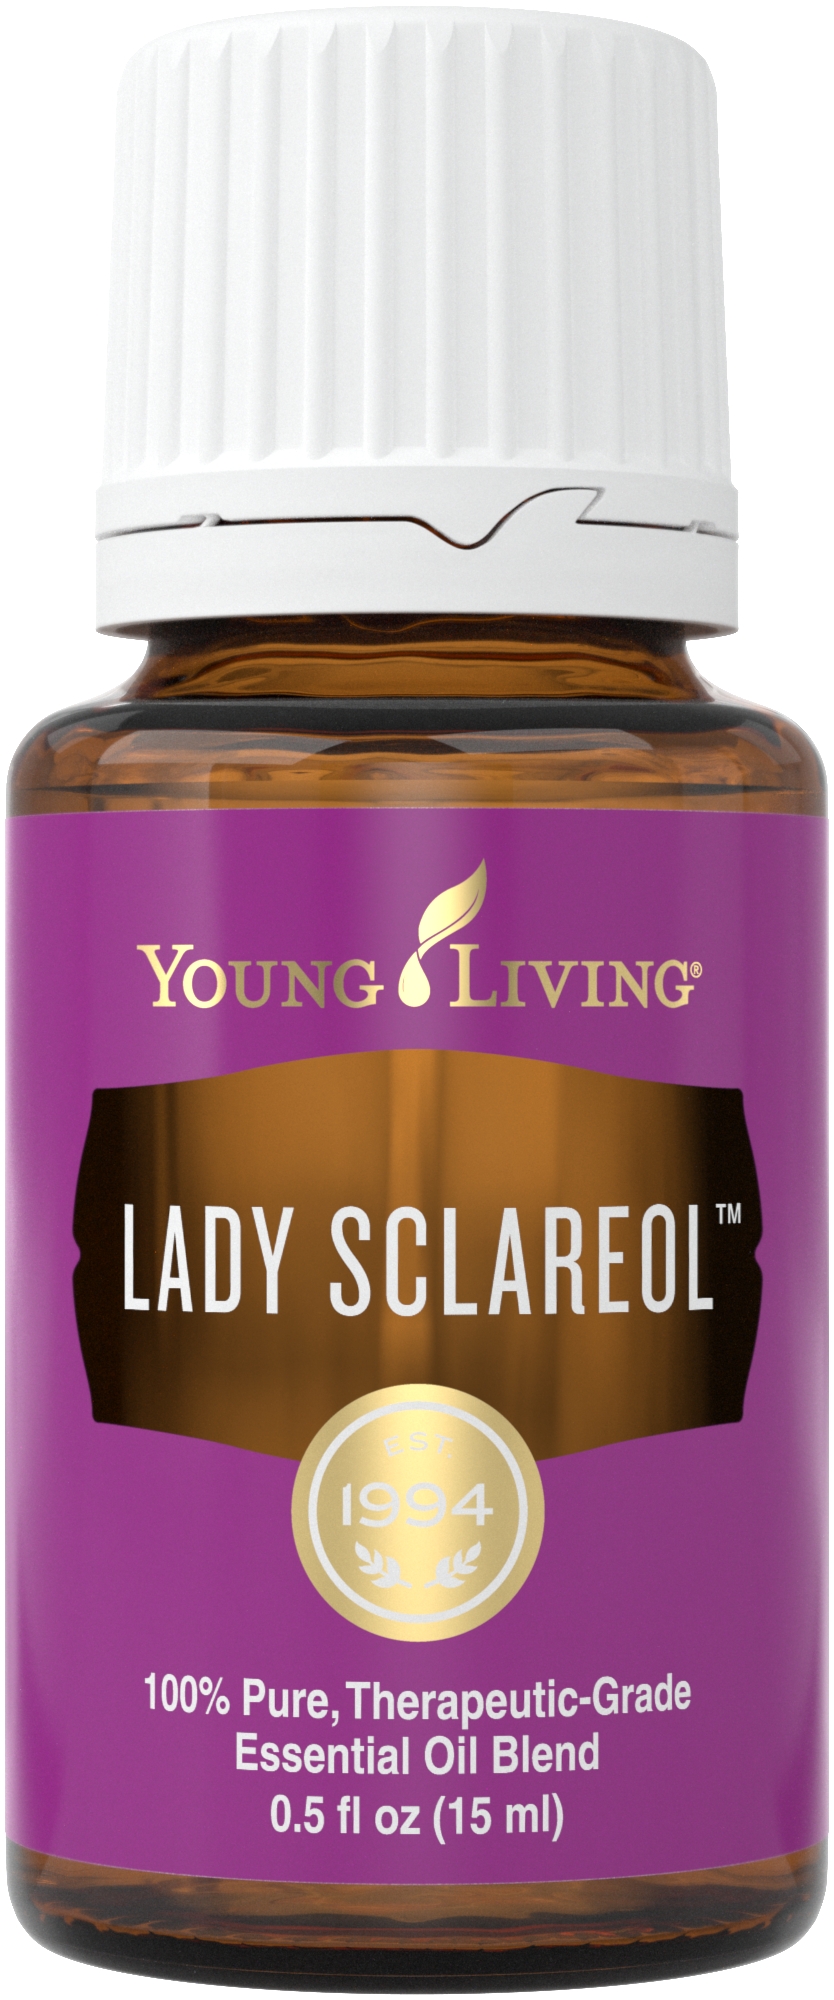 Campuran minyak esensial Lady Sclareol | Young Living